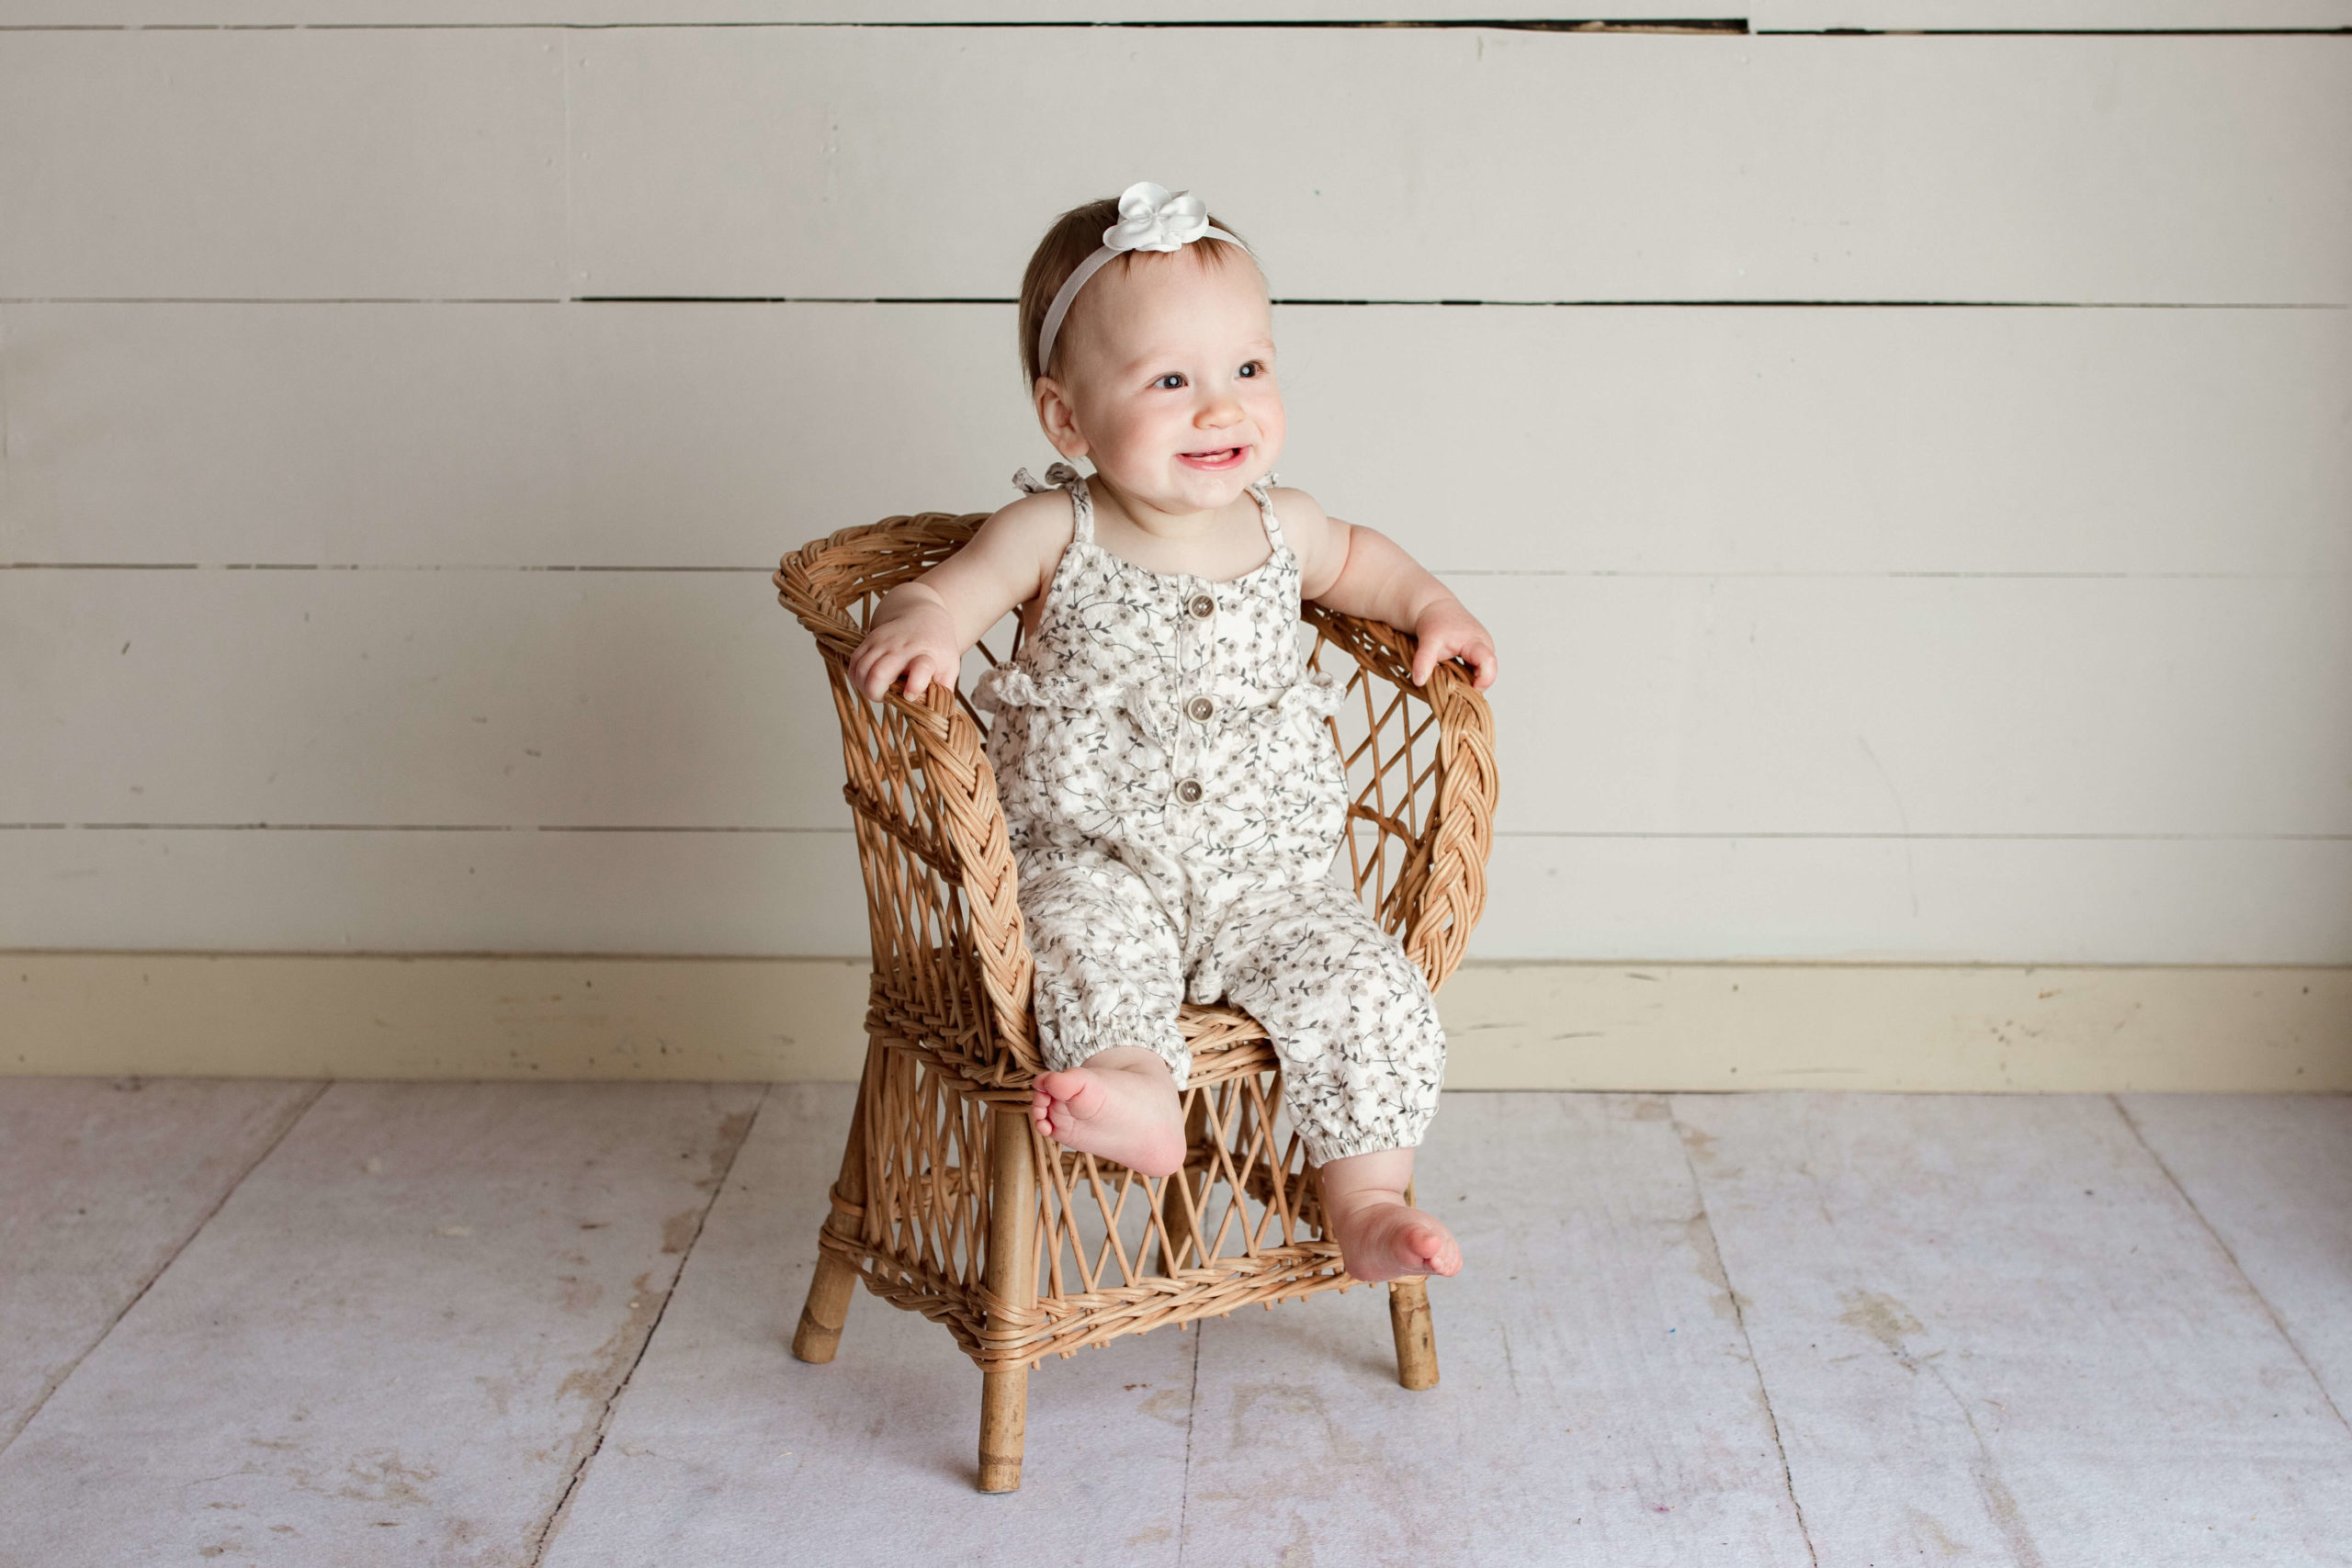 9 month old baby girl sitting in a wicker chair wearing a floral jumper